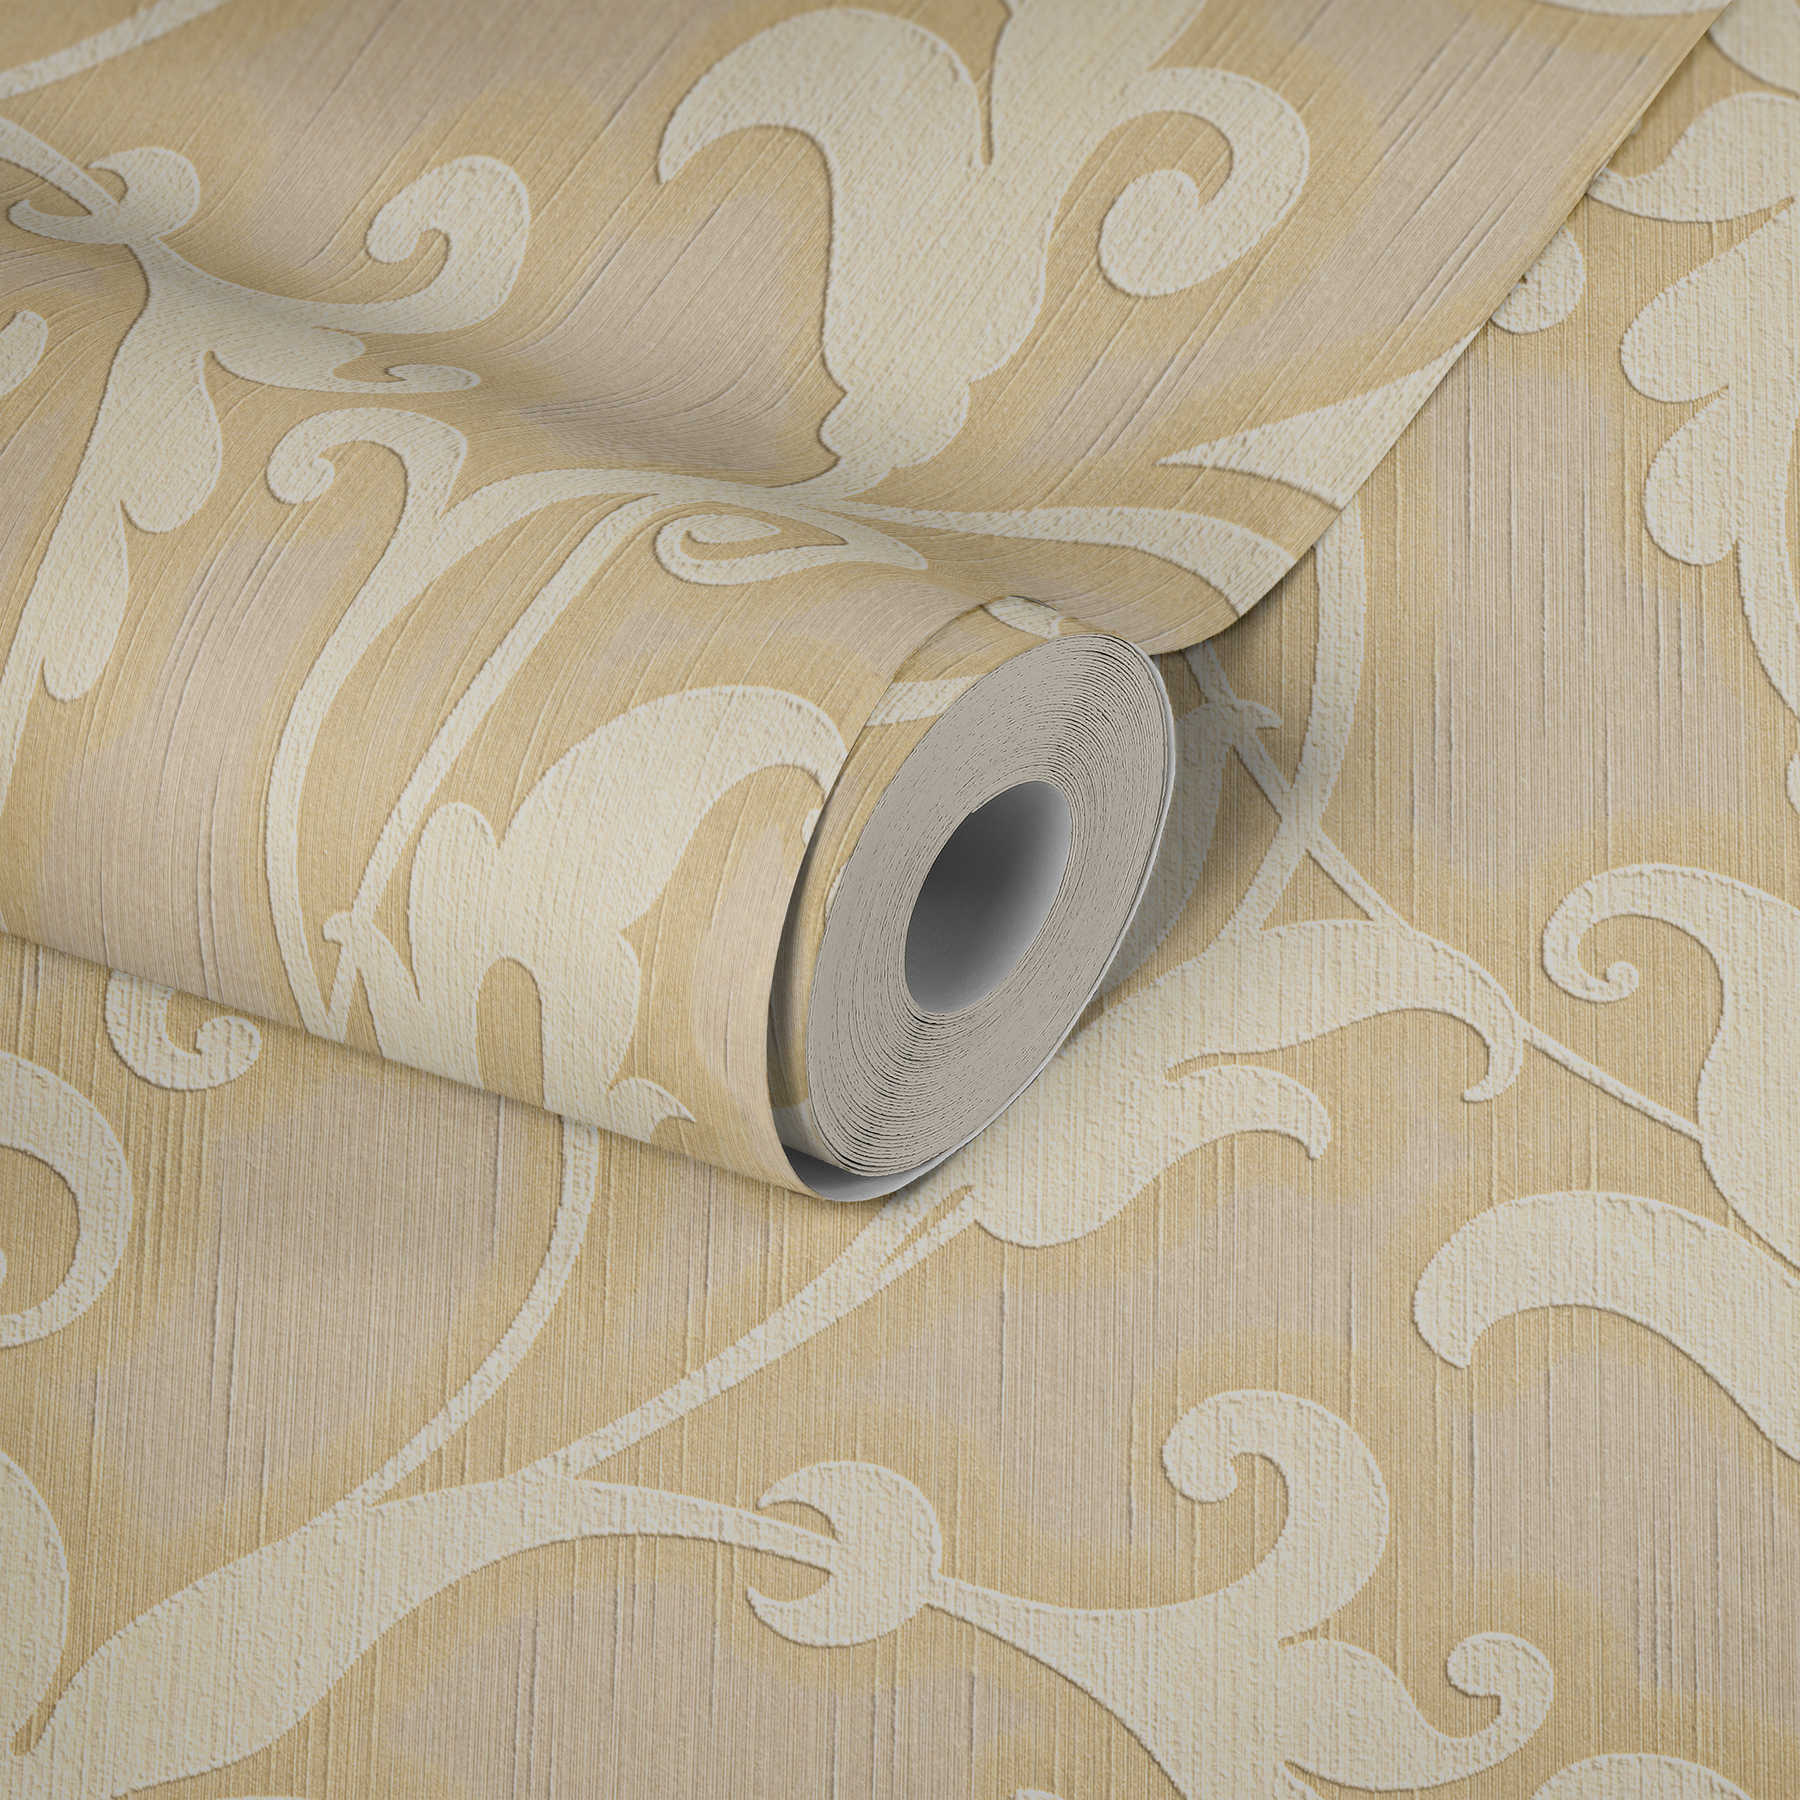             Baroque wallpaper with textile structure & embossed pattern - yellow, gold
        